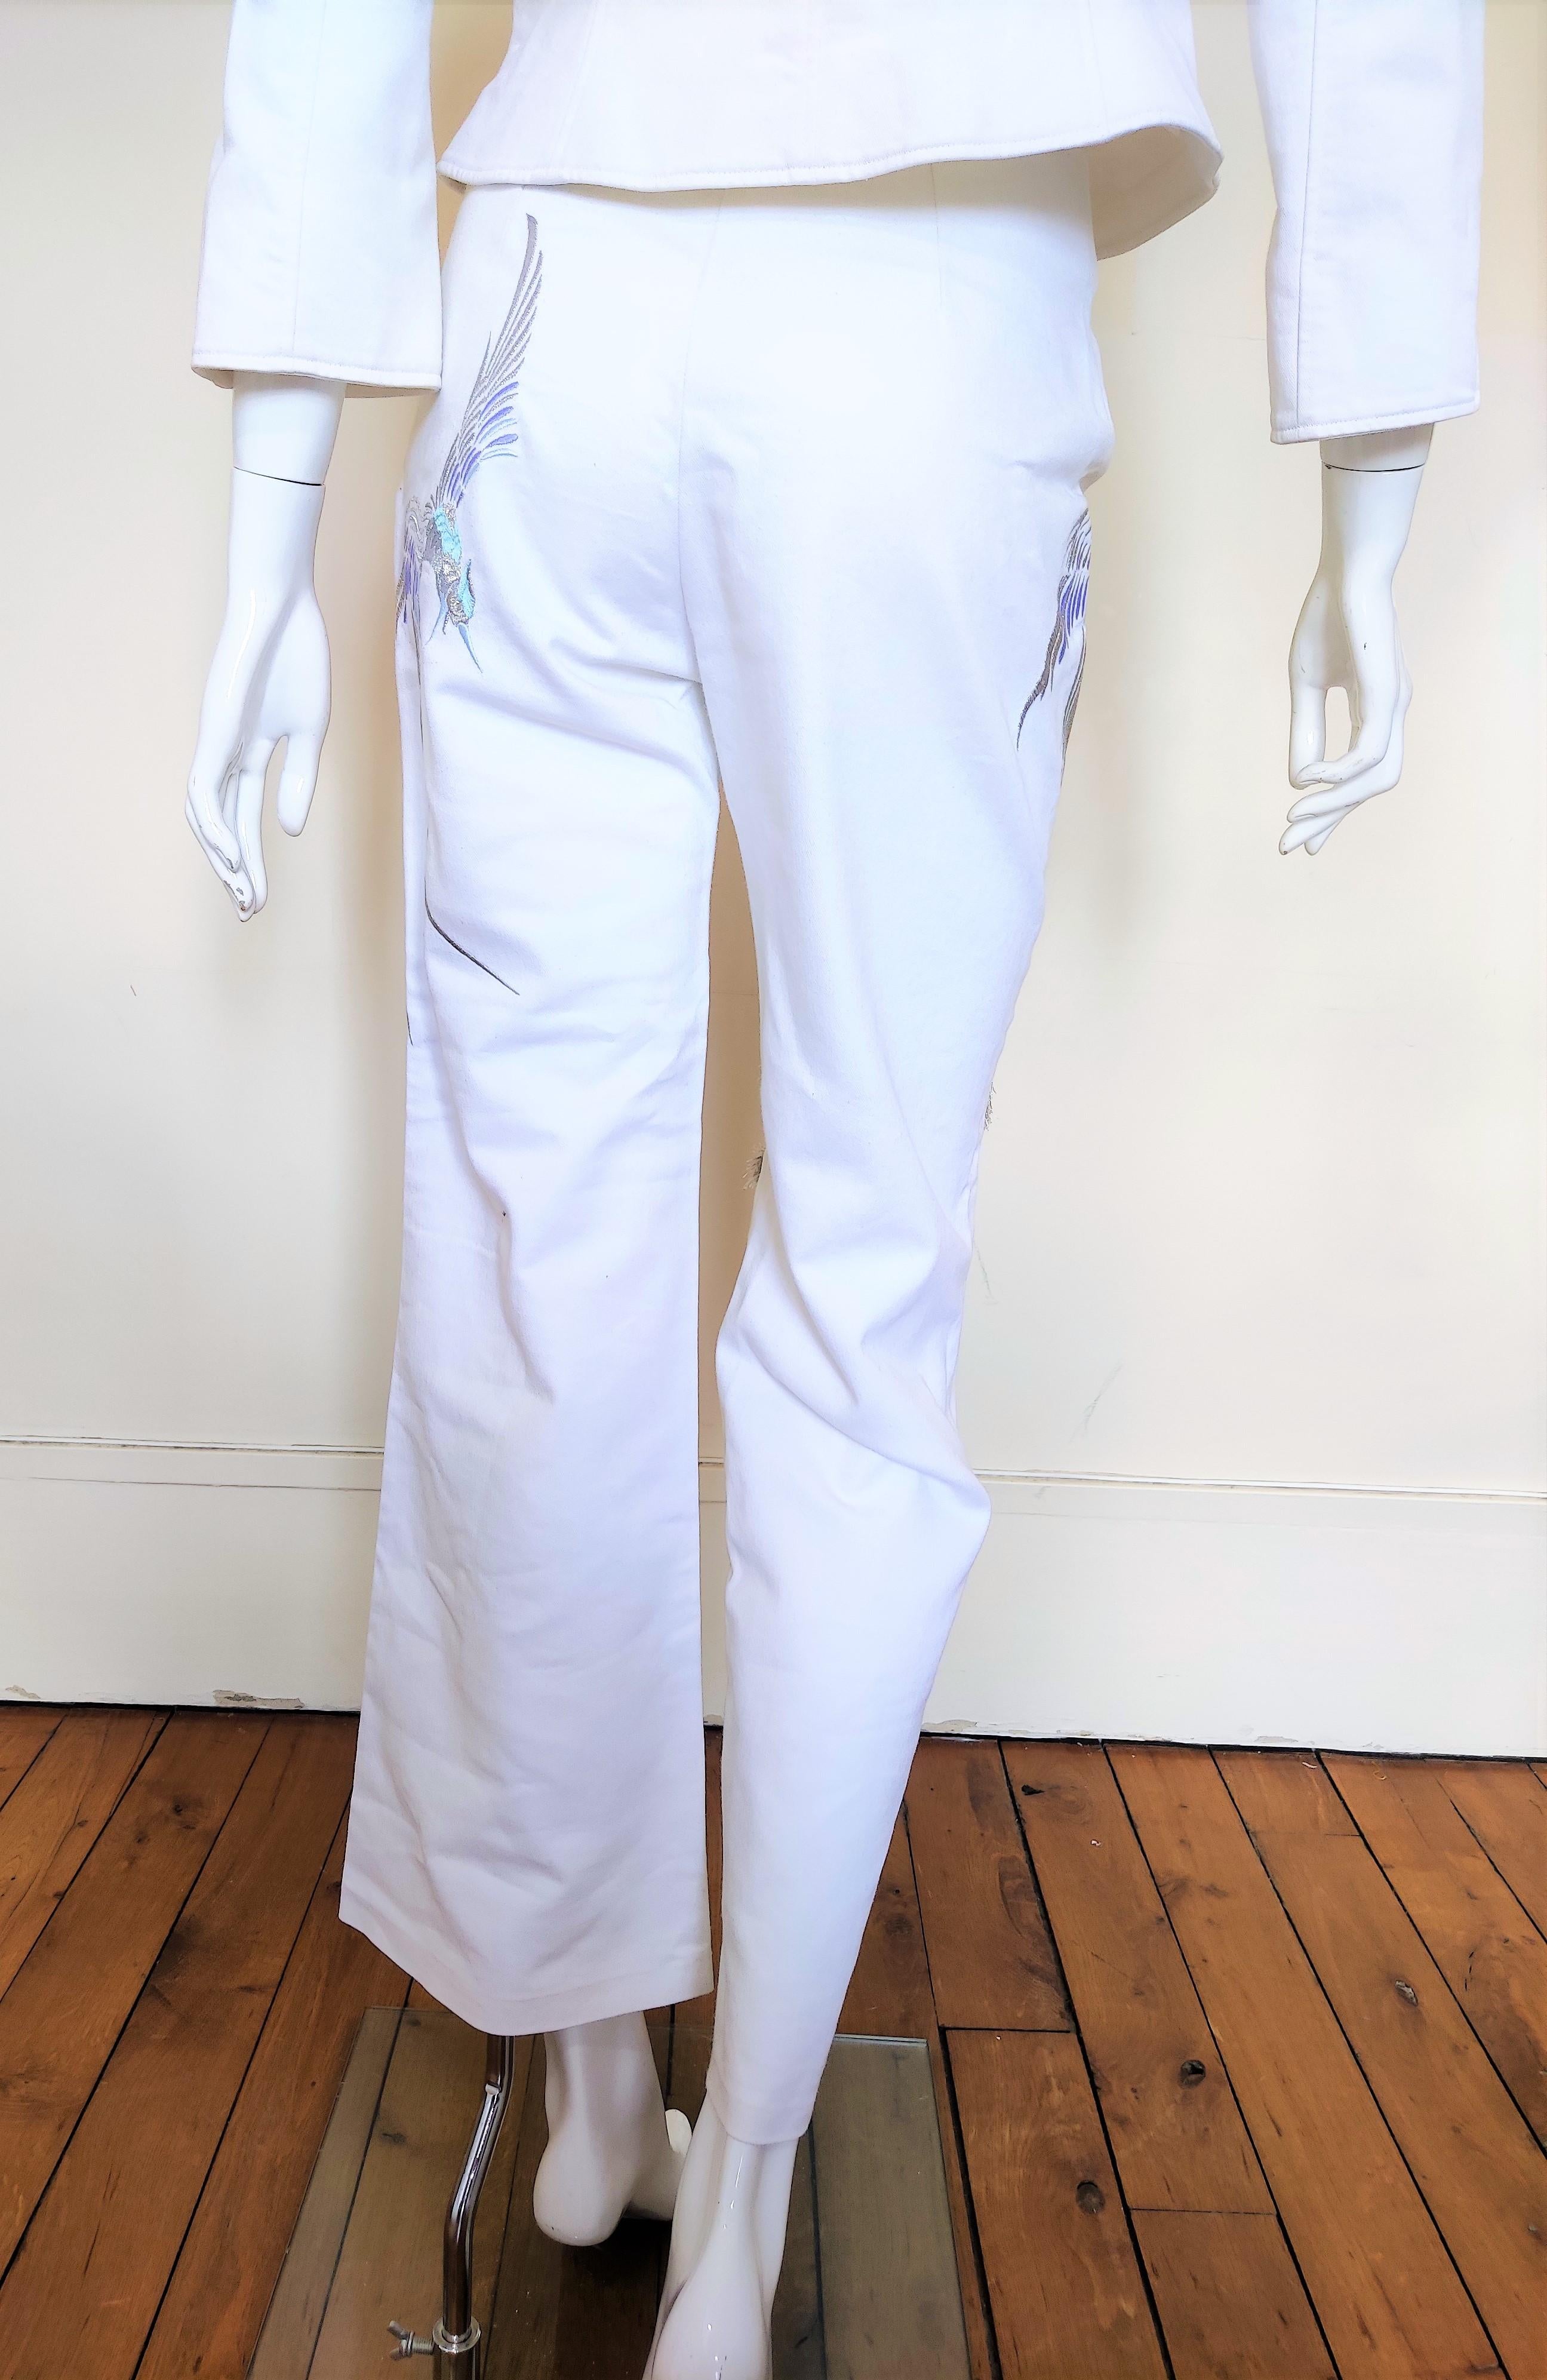 Women's Thierry Mugler Peacock Bird White Gown Couture Pants Jacket Ensemble Suit For Sale